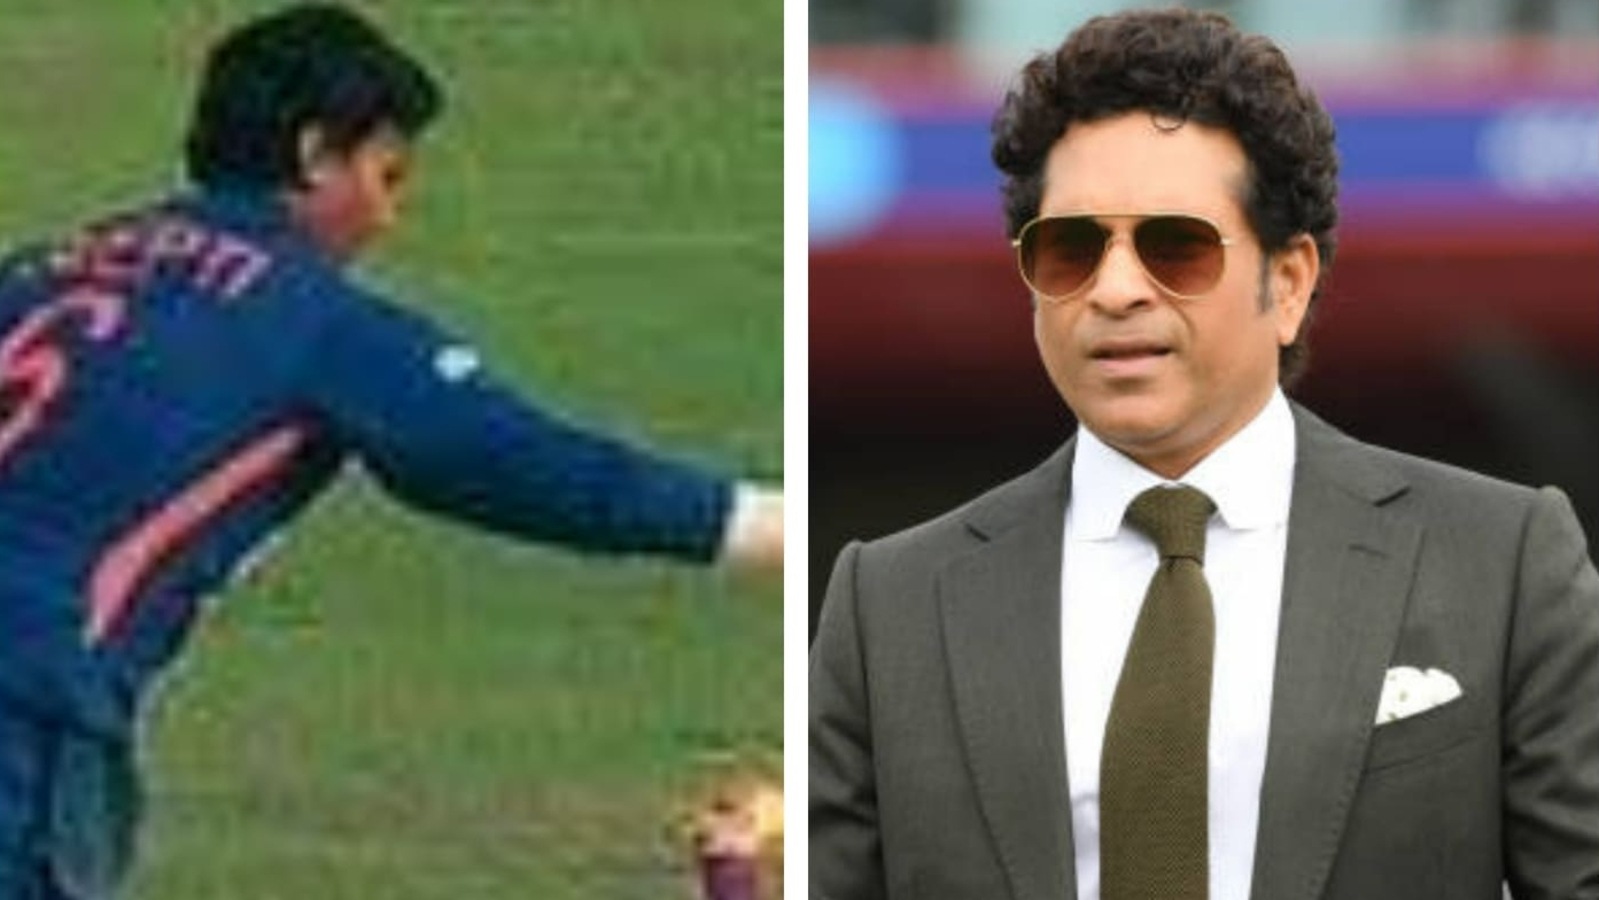 sachin-tendulkar-weighs-in-on-spirit-of-cricket-debate-whatever-you-play-within-the-rules